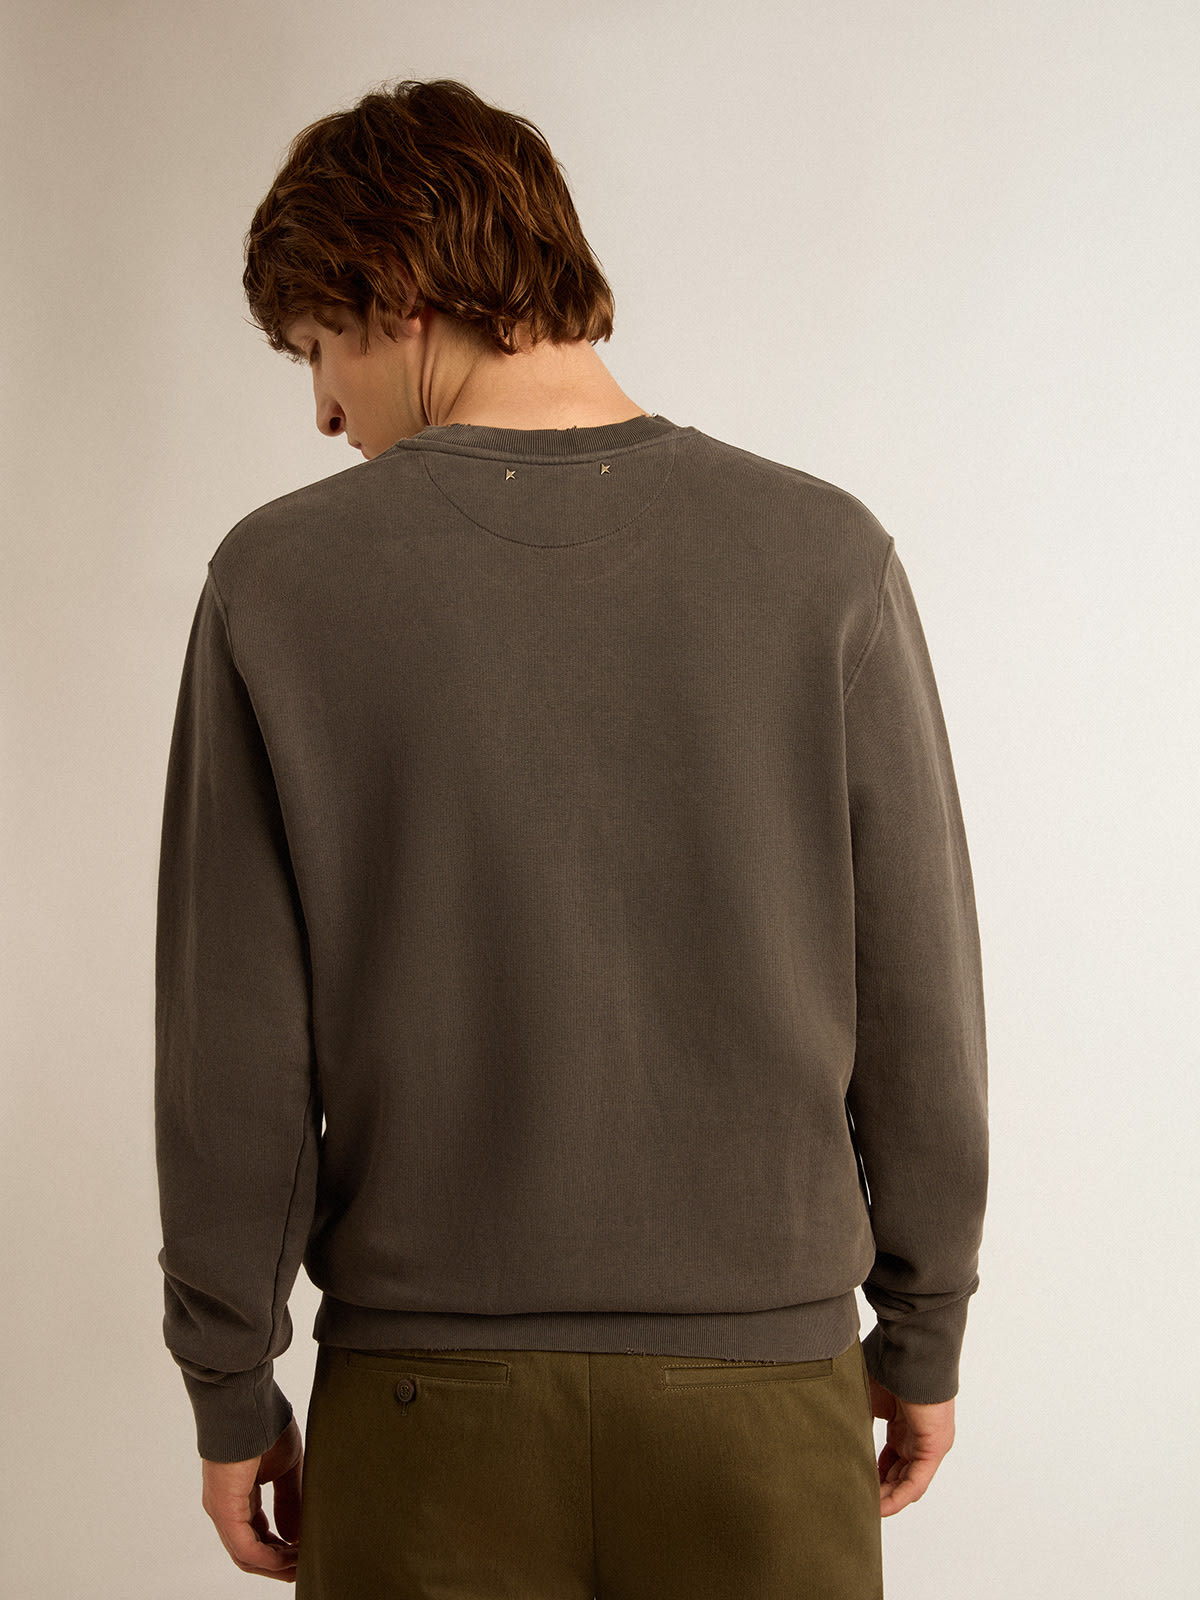 Golden Goose - Golden Collection sweatshirt with logo in anthracite gray with a distressed treatment in 